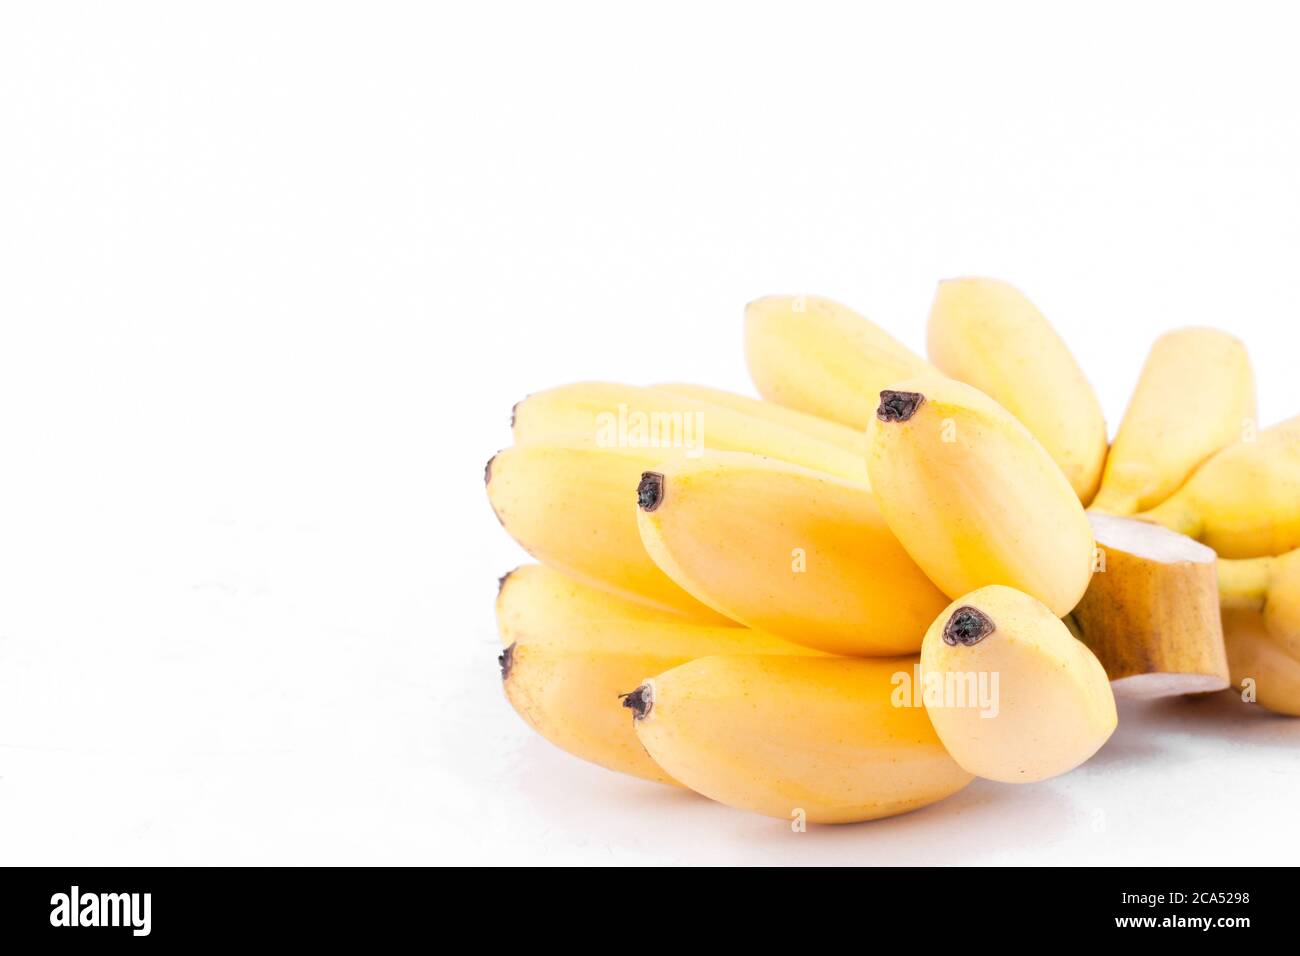 golden bananas or egg bananas  are Musaceae family   on white background healthy Pisang Mas Banana fruit food isolated Stock Photo